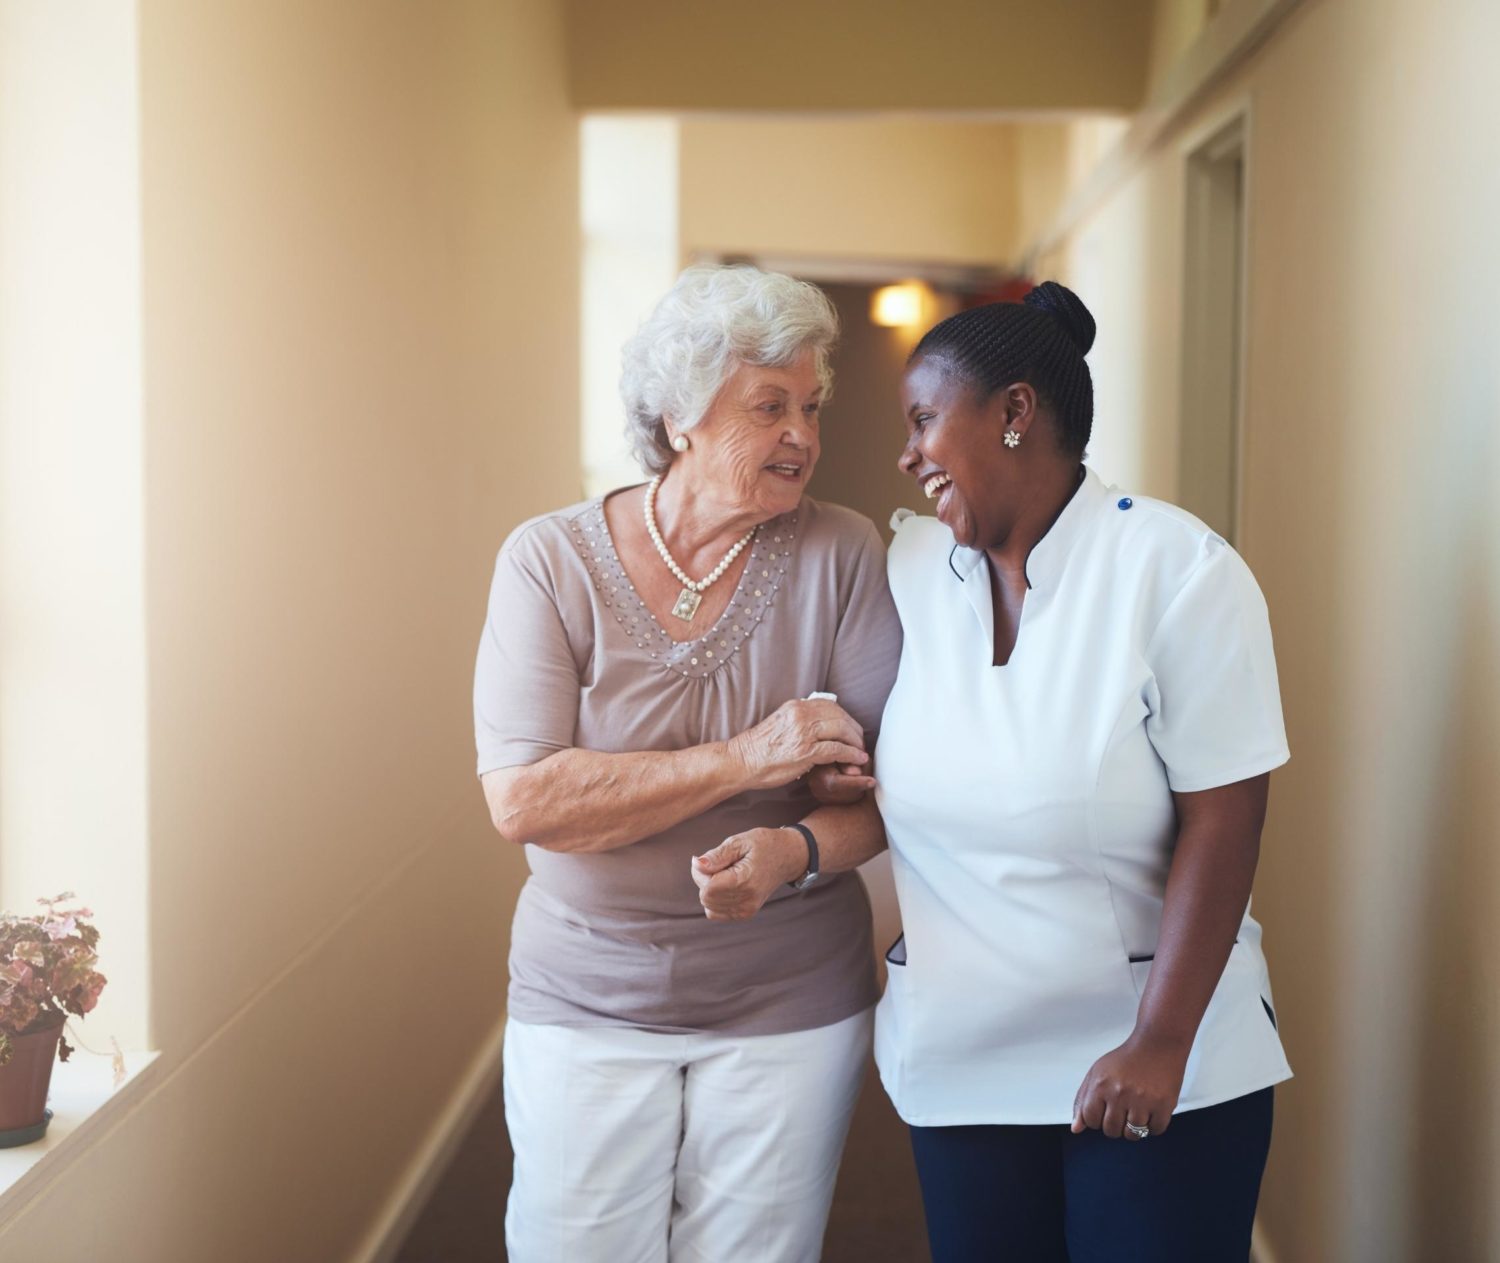 6 Questions to Ask Before Choosing a Caregiver